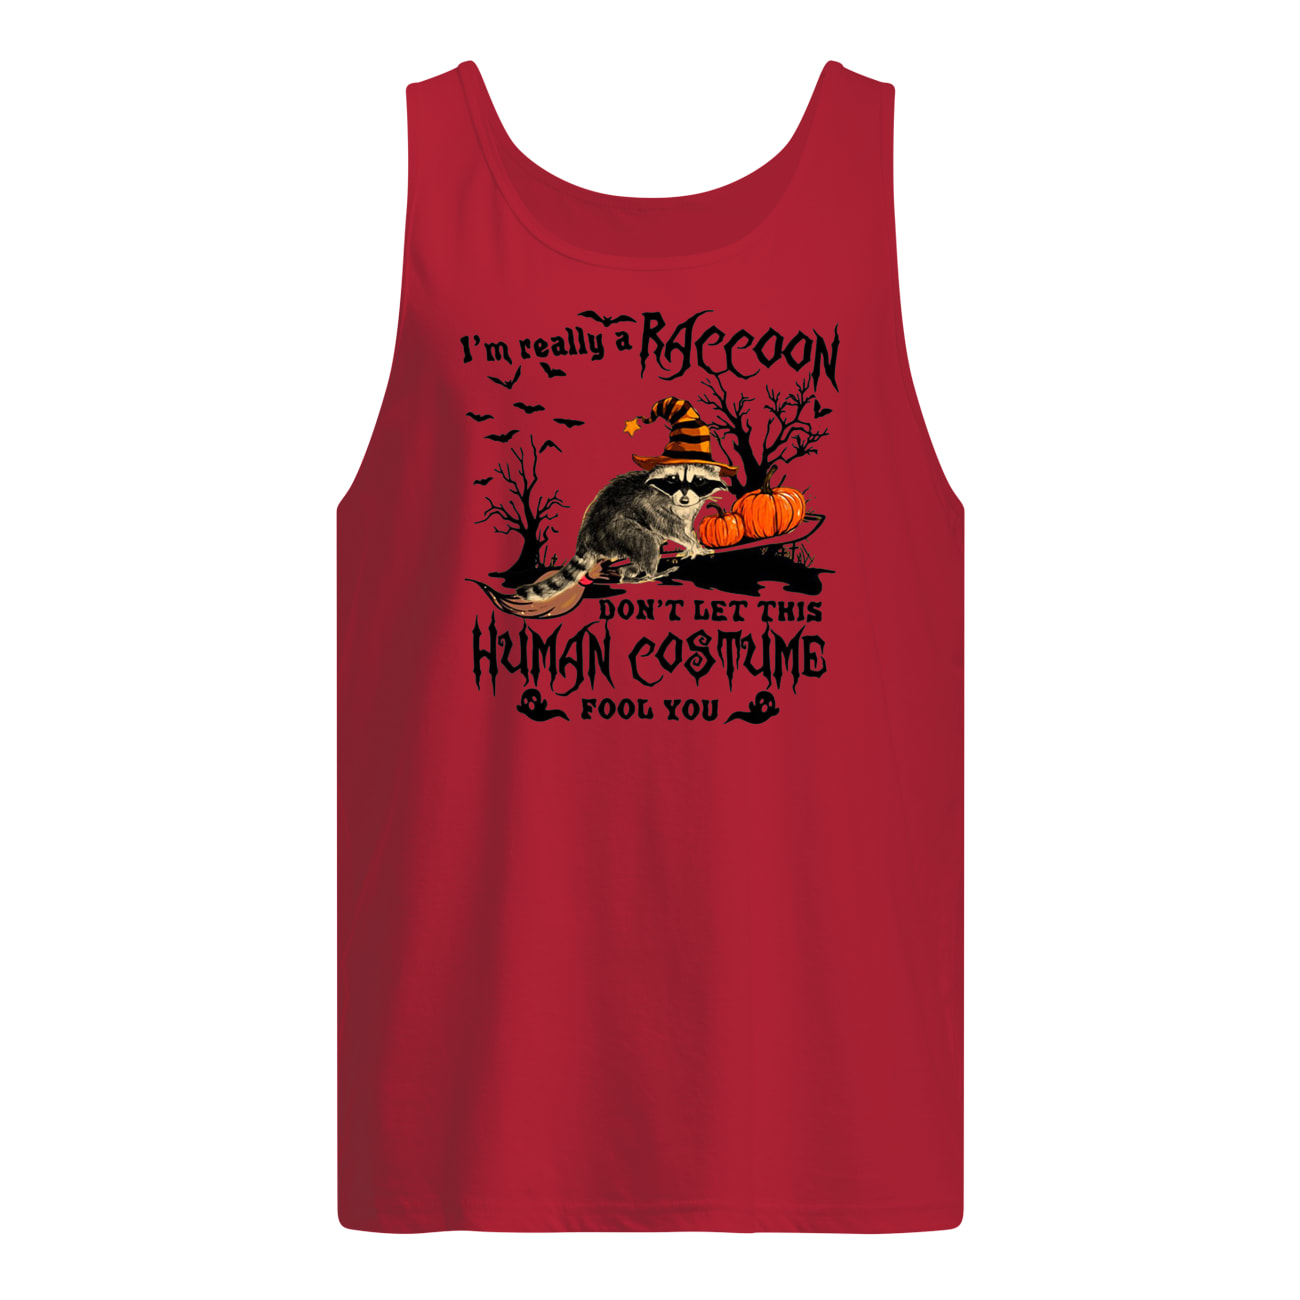 I’m really a raccoon don’t let this human costume fool you halloween tank top